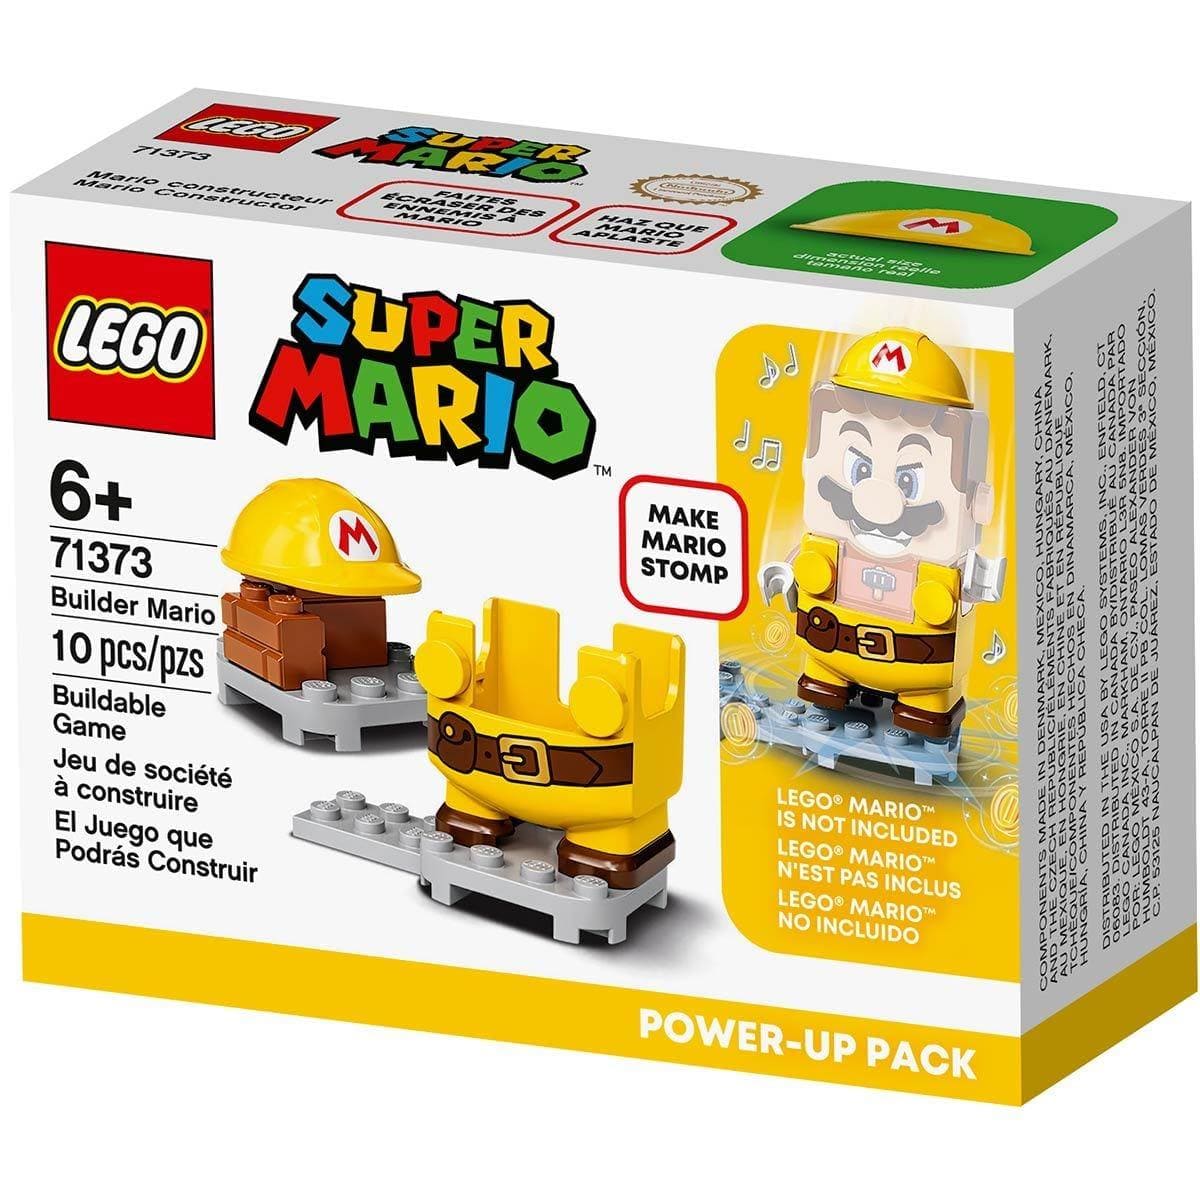 Buy Games Builder Mario Power-Up Pack, Lego Super Mario sold at Party Expert